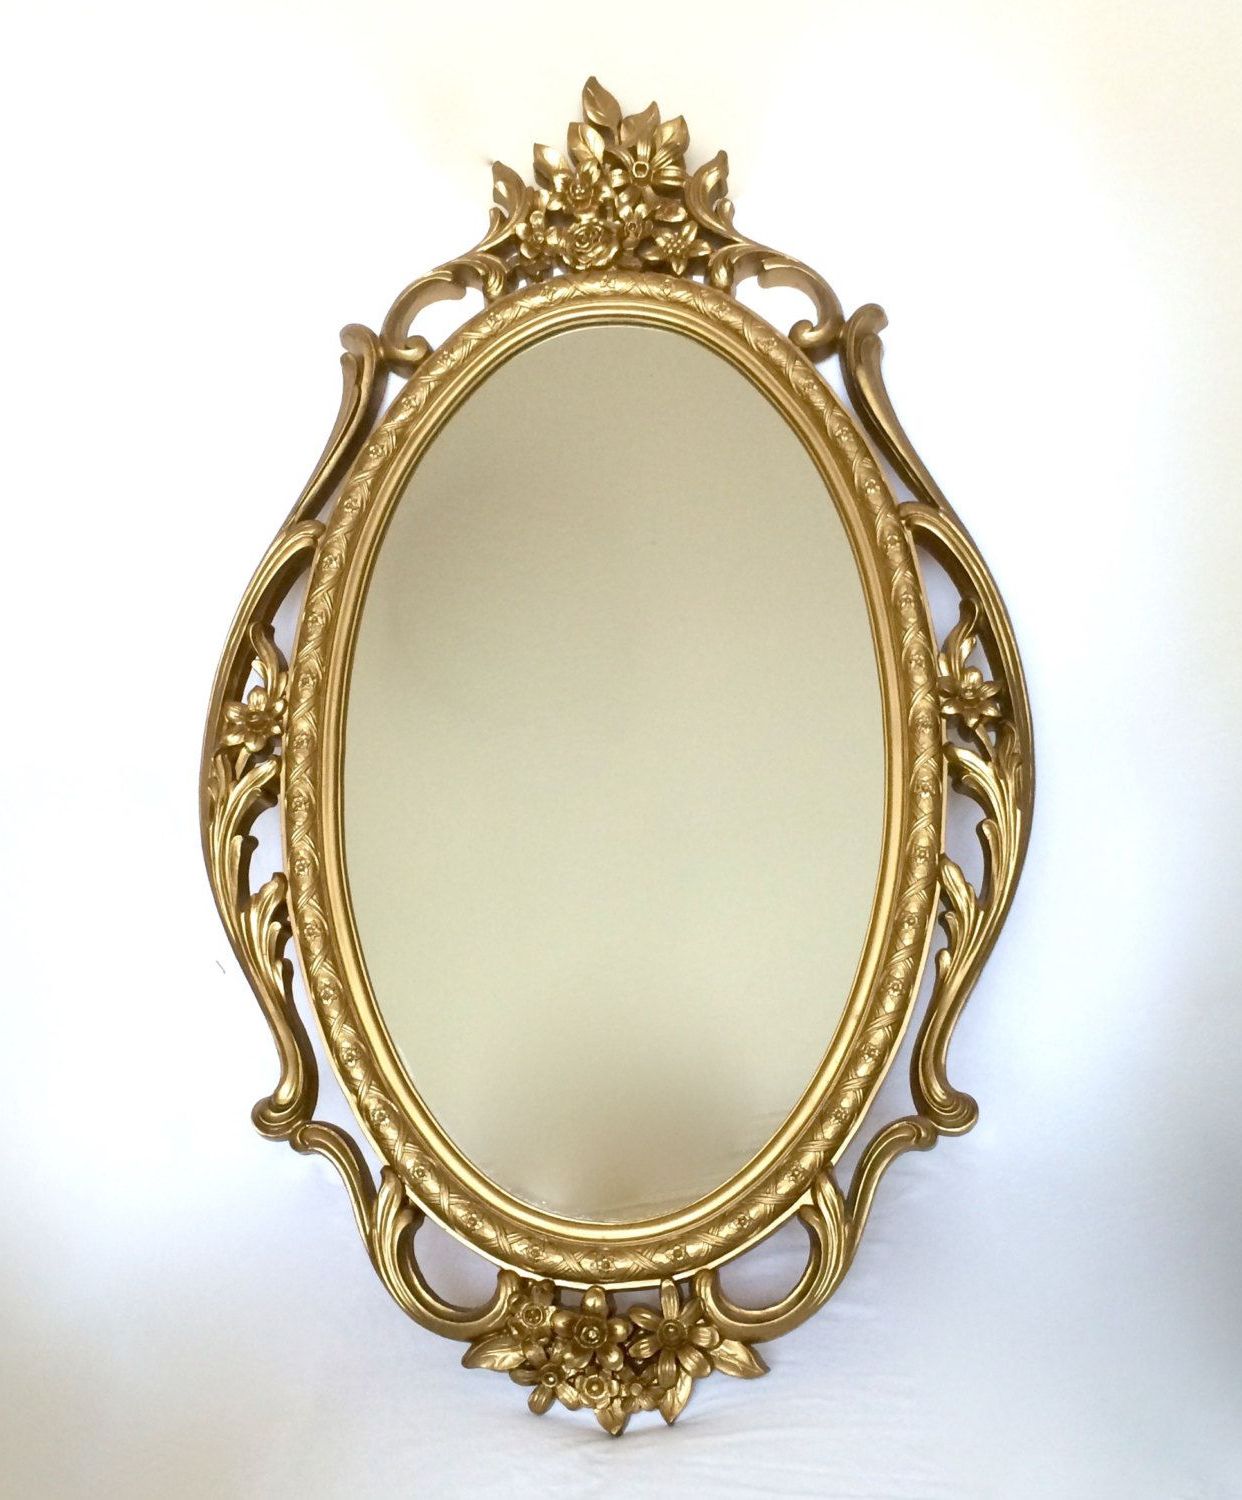 Most Recent Broadmeadow Glam Accent Wall Mirrors Inside Vintage Syroco Gold Oval Mirror Ornate Floral Resin Hollywood (View 9 of 20)